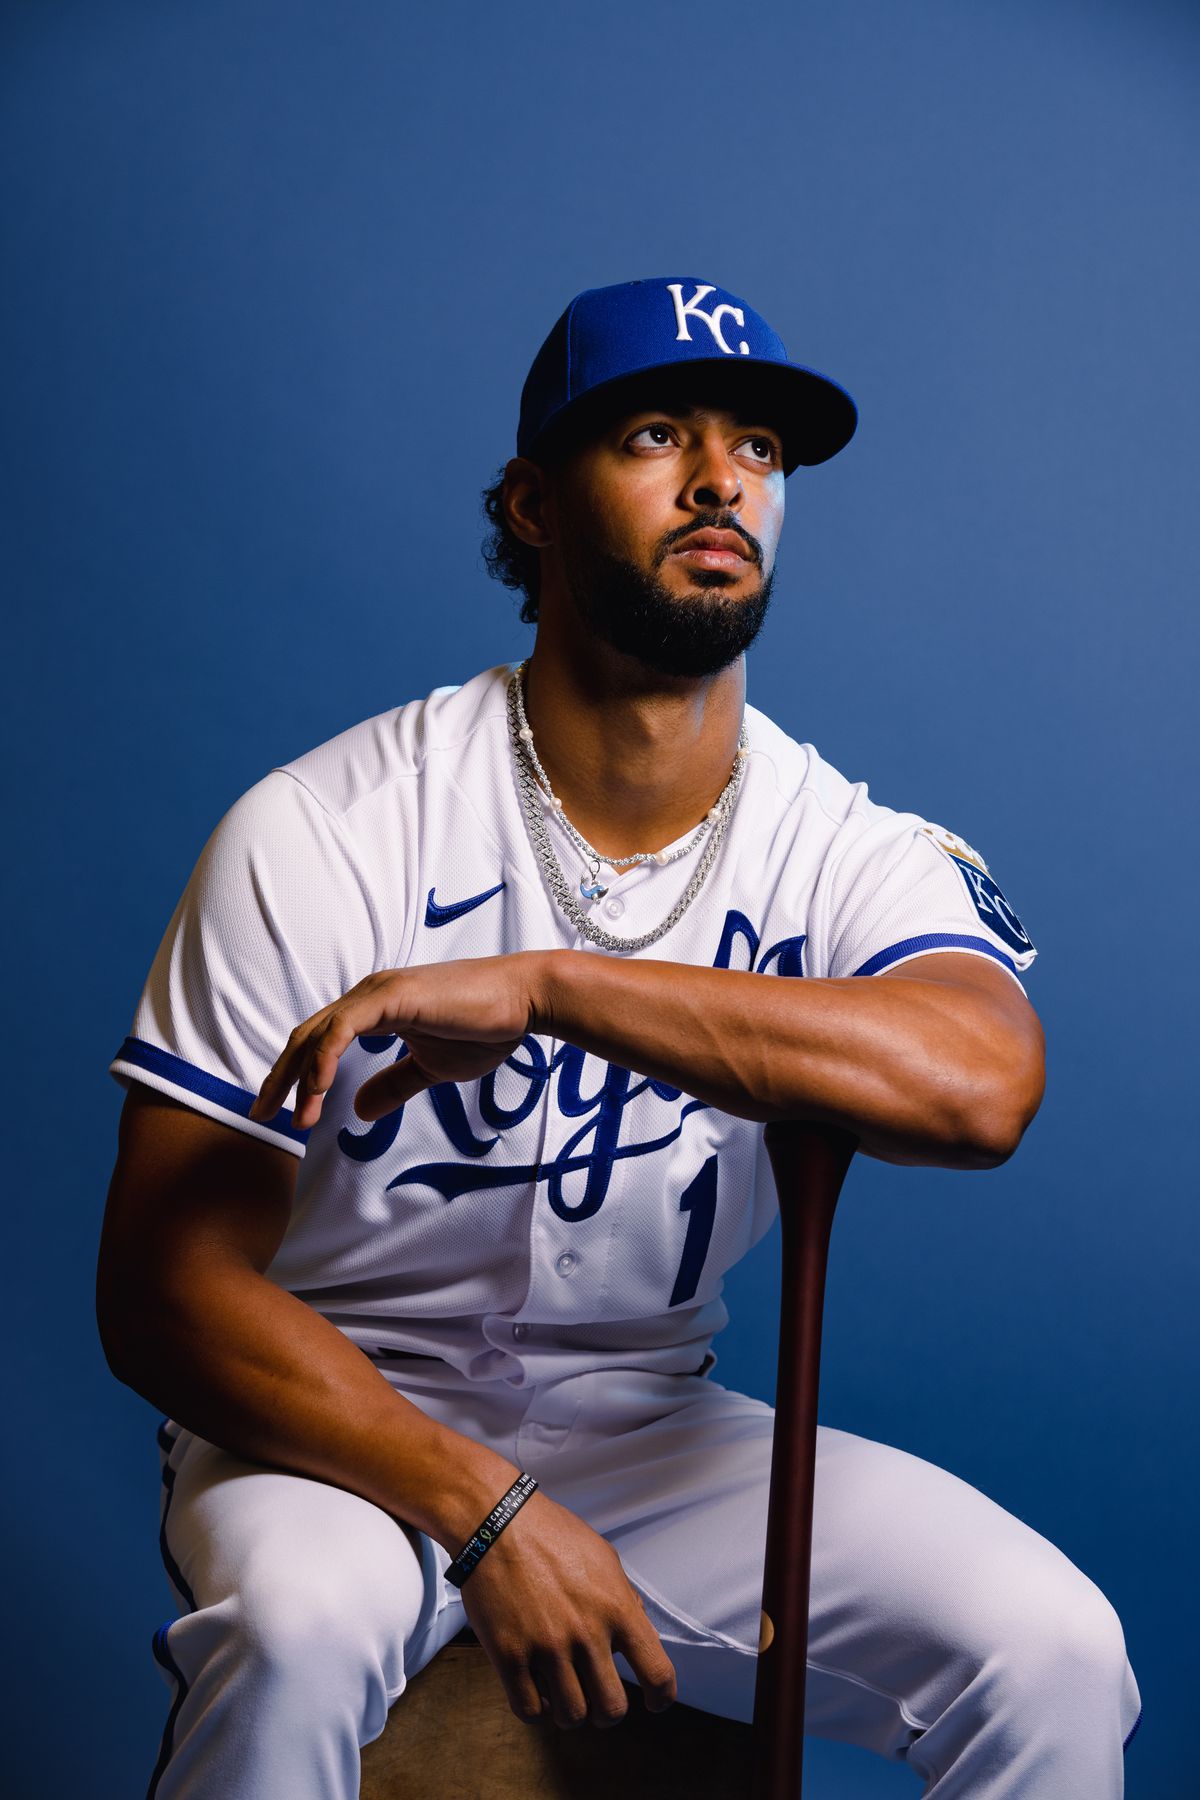 MJ Melendez #1 of the Kansas City Royals poses for a photo on media day at Surprise Stadium on February 22, 2023 in Surprise, Arizona.